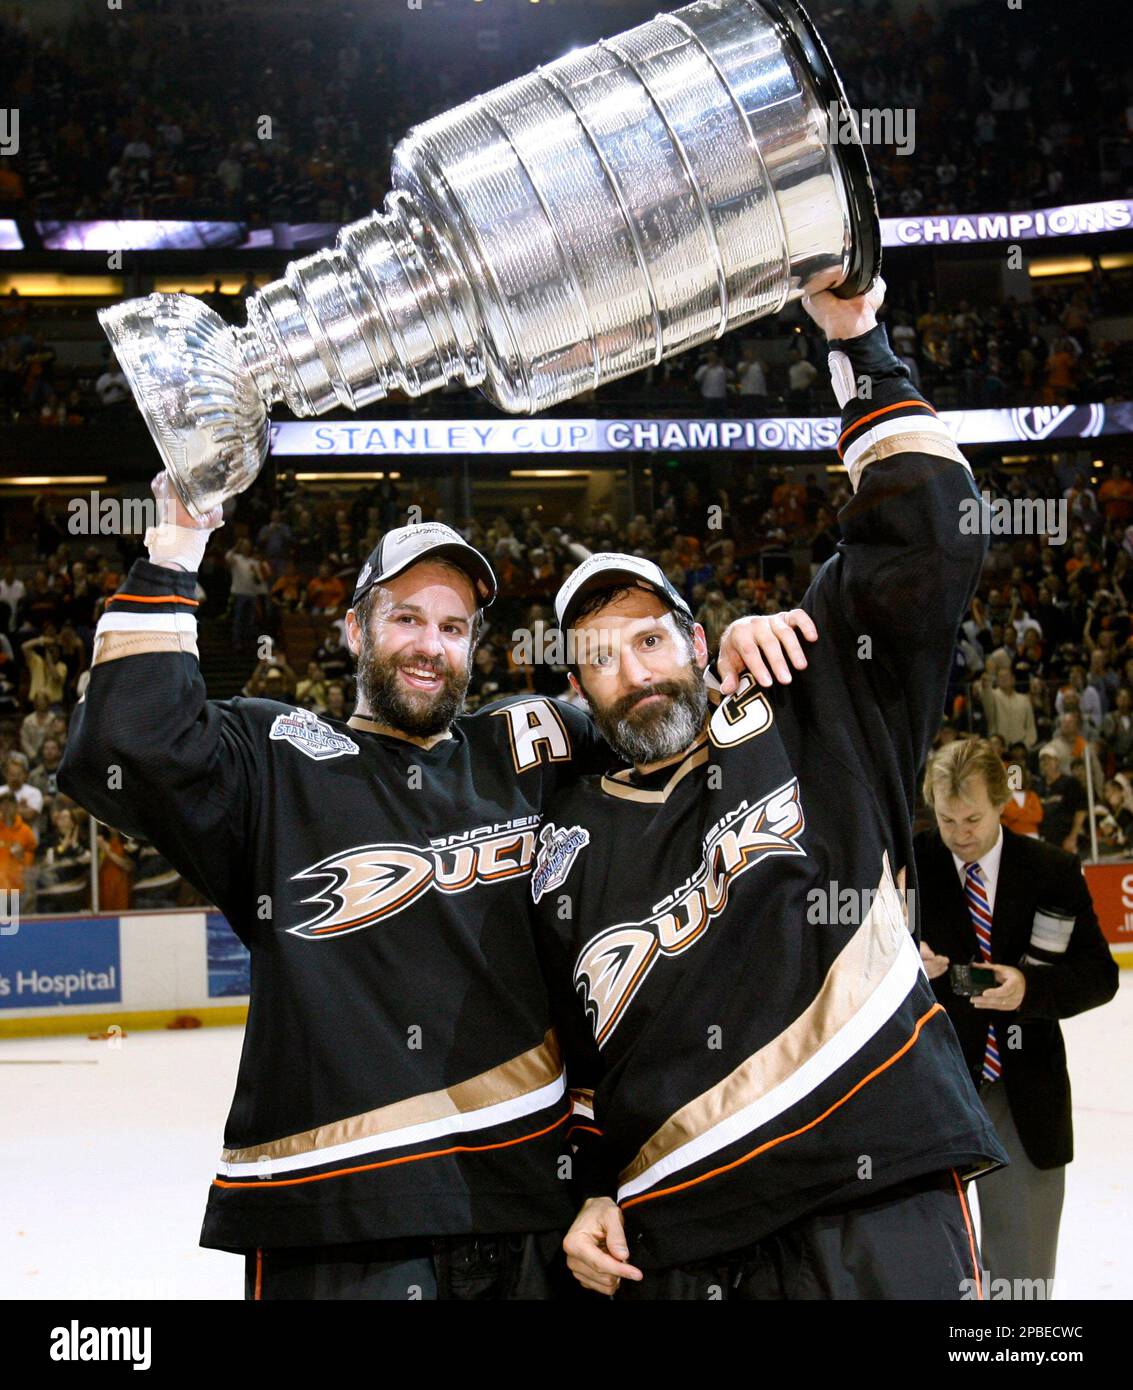 Anaheim Ducks captain Scott Niedermayer, right, and his brother Rob  Niedermayer hold up the Stanley Cup after the Ducks won the finals with a  6-2 victory over the Ottawa Senators in Anaheim,